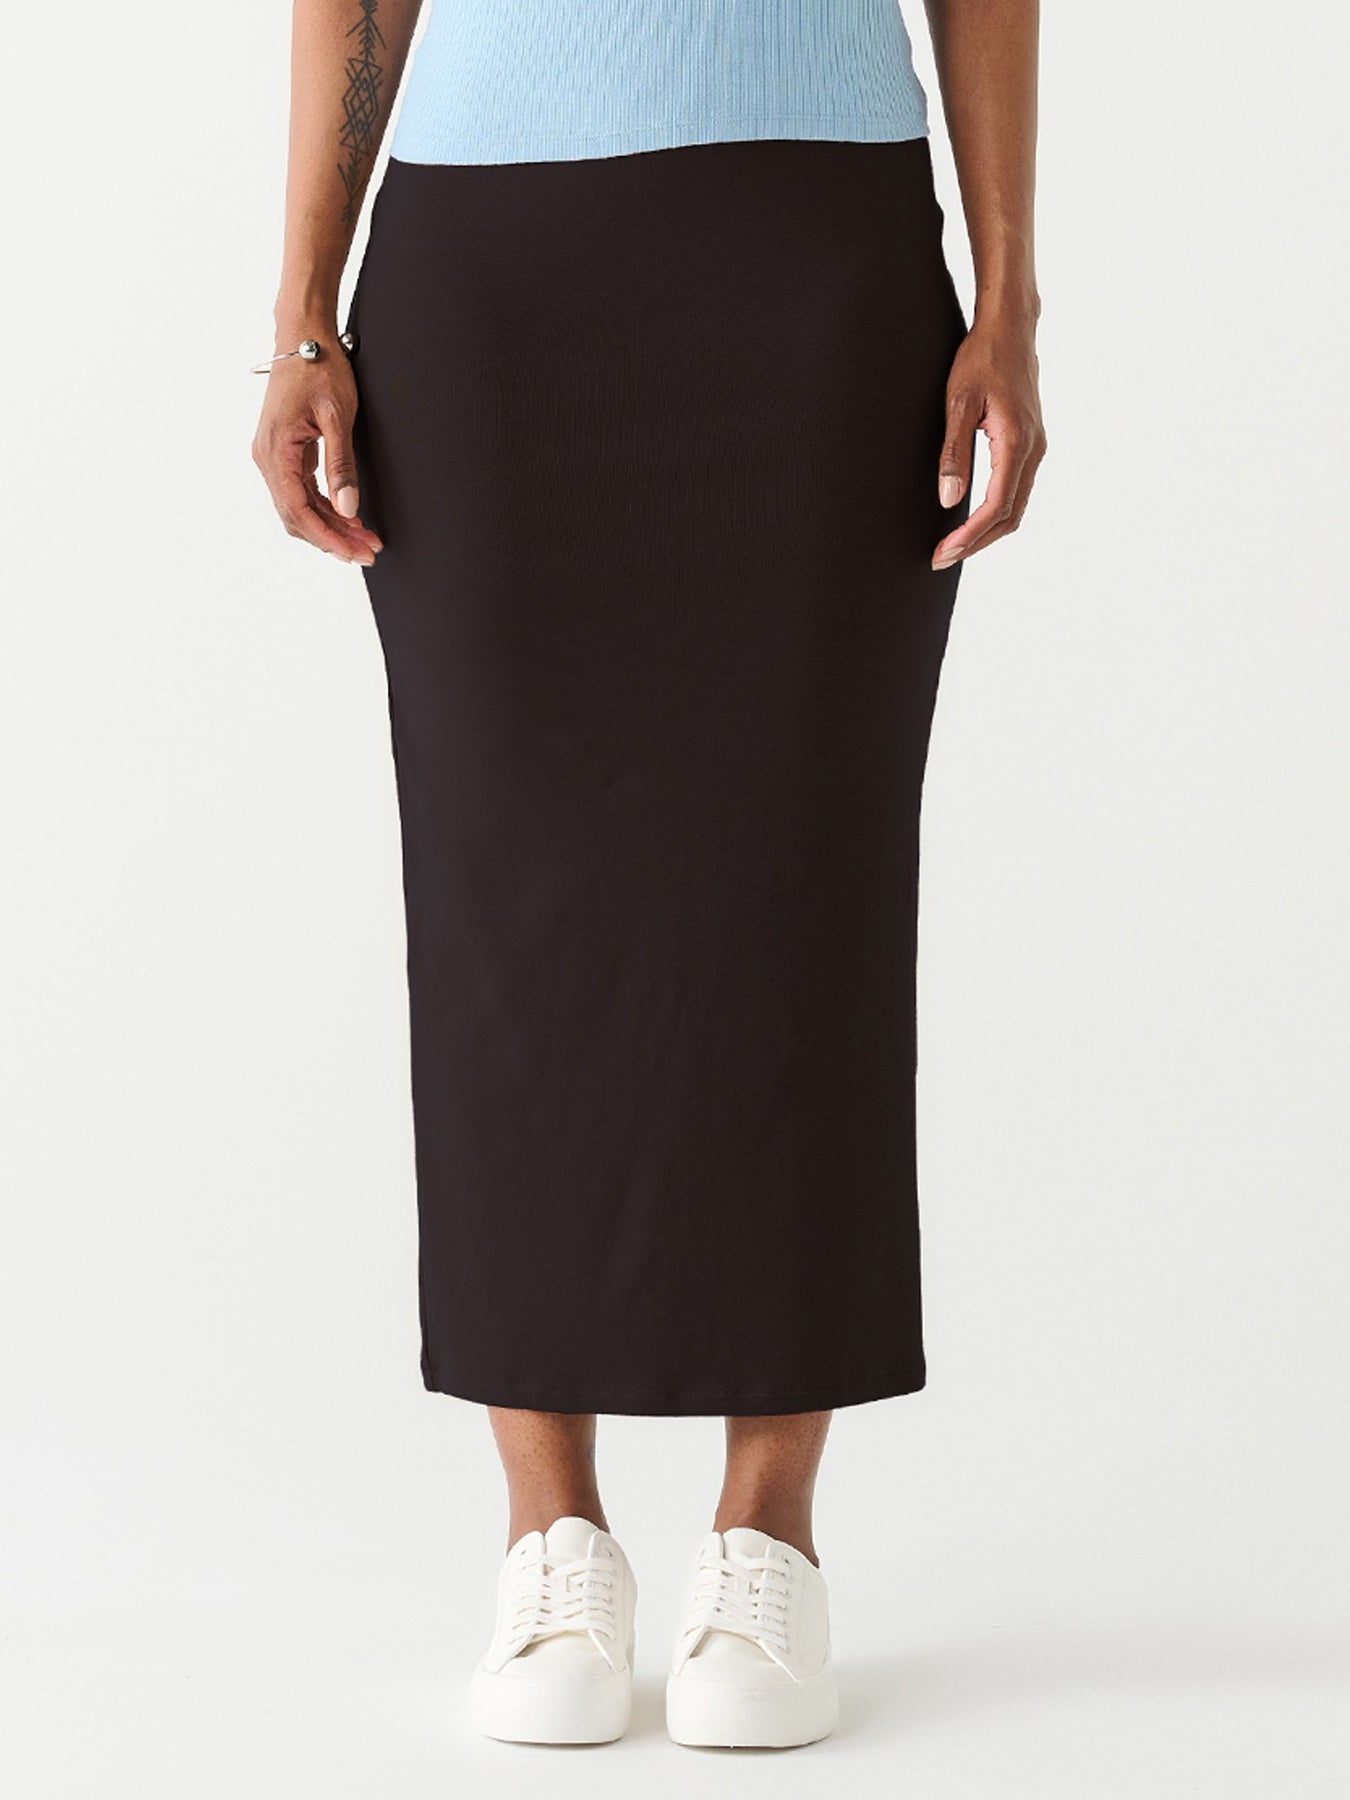 Skirts – 27 Boutique